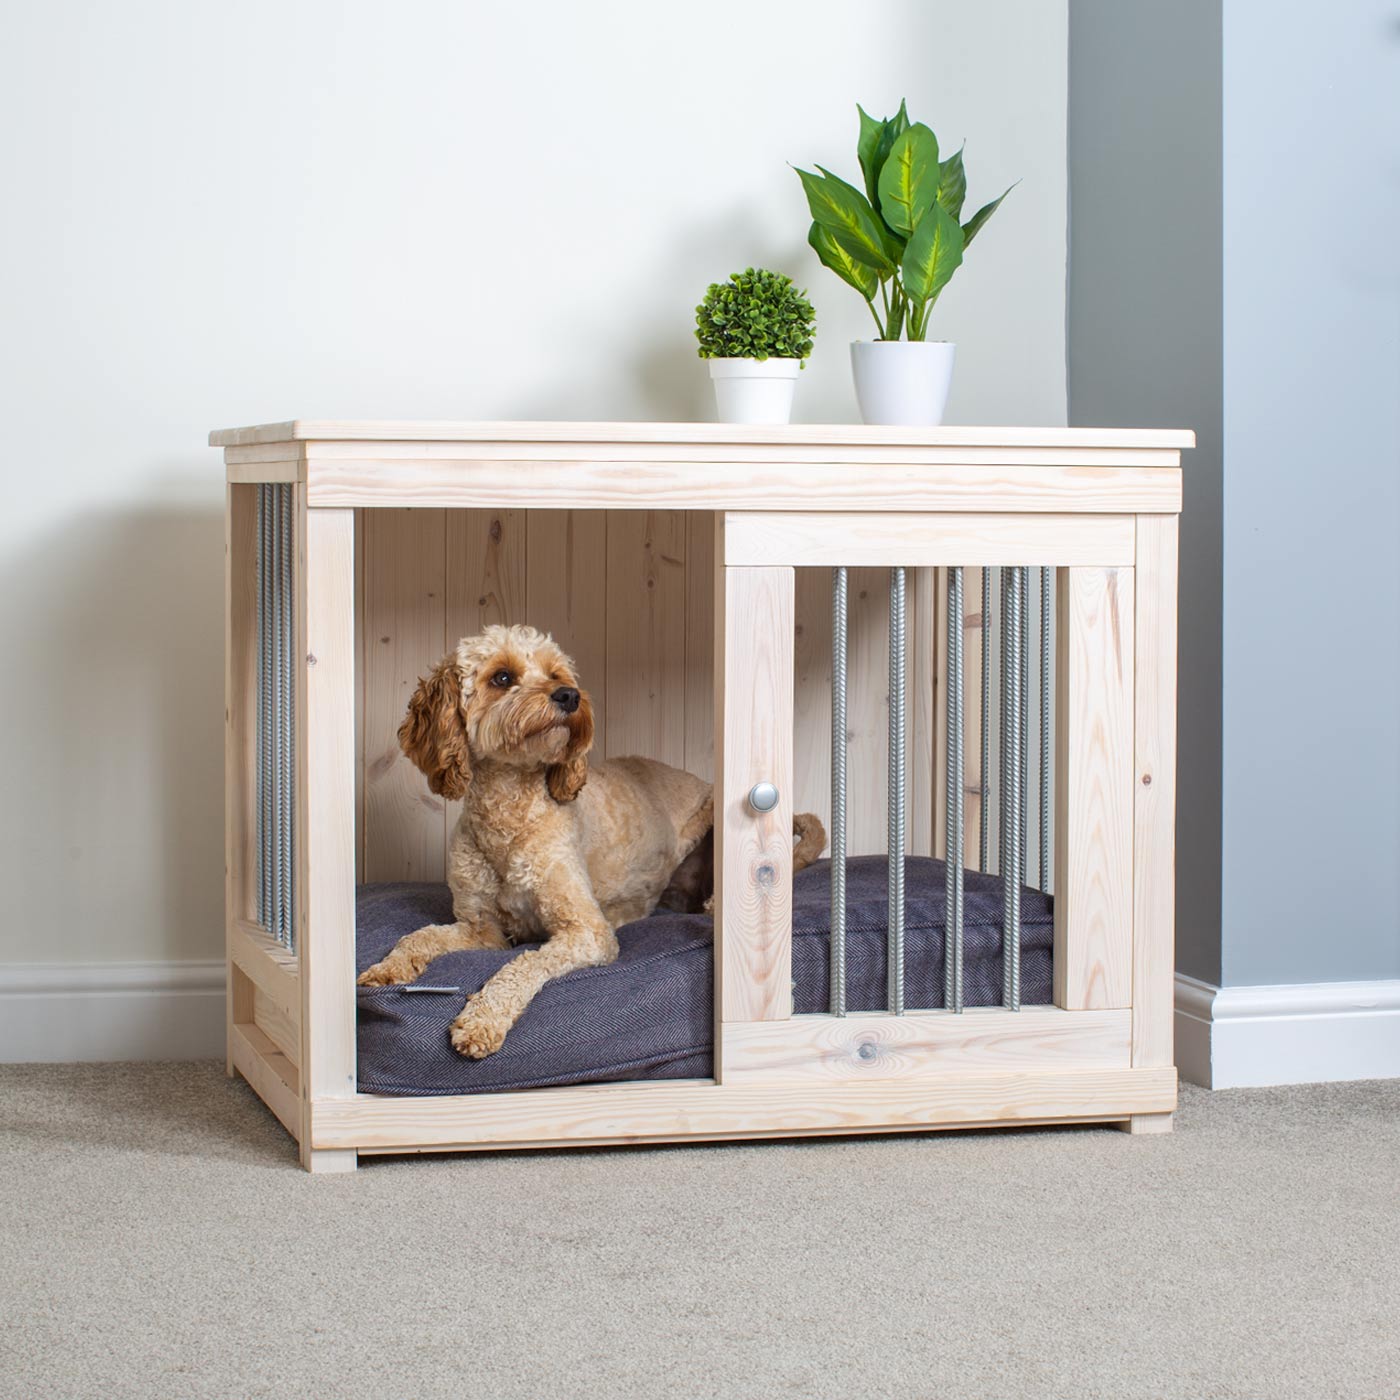 Wooden Rustic Sliding Door Dog Crate - White Wash, Dog Crate